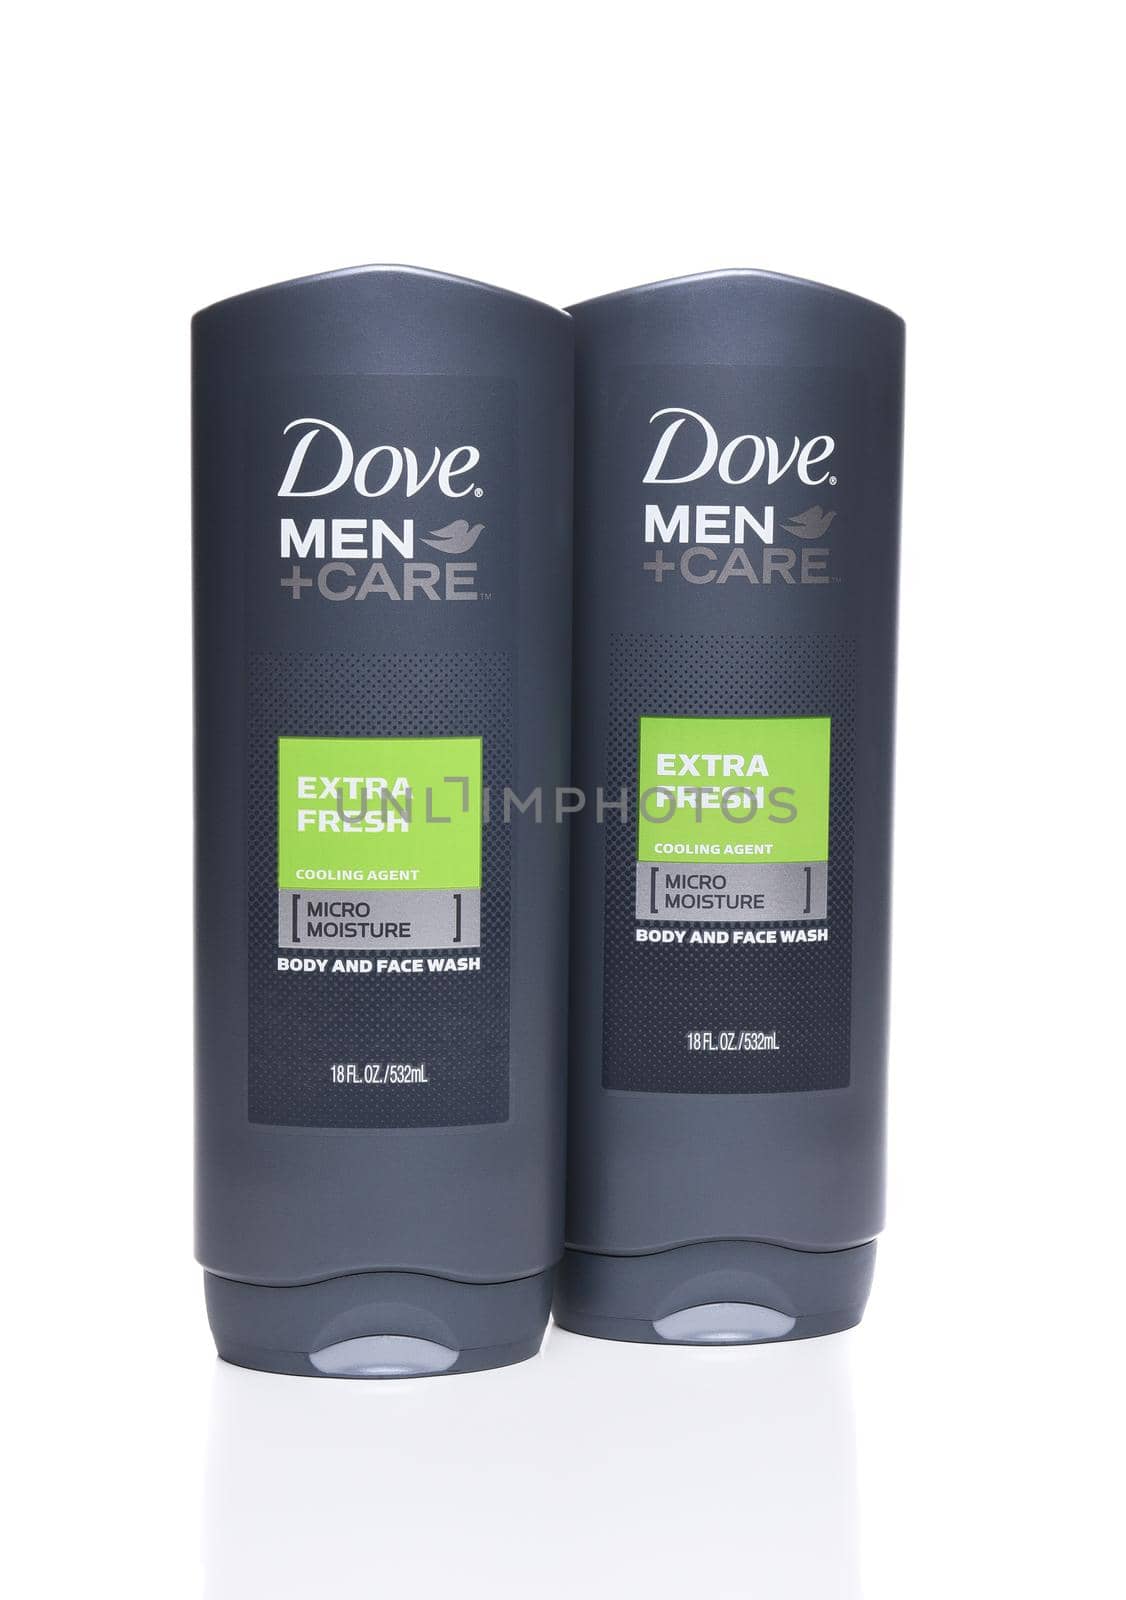 IRVINE, CA - SEPTEMBER 22, 2017: Dove Men + Care Extra Fresh Body and Face Wash. Dove is a personal care brand owned by Unilever.